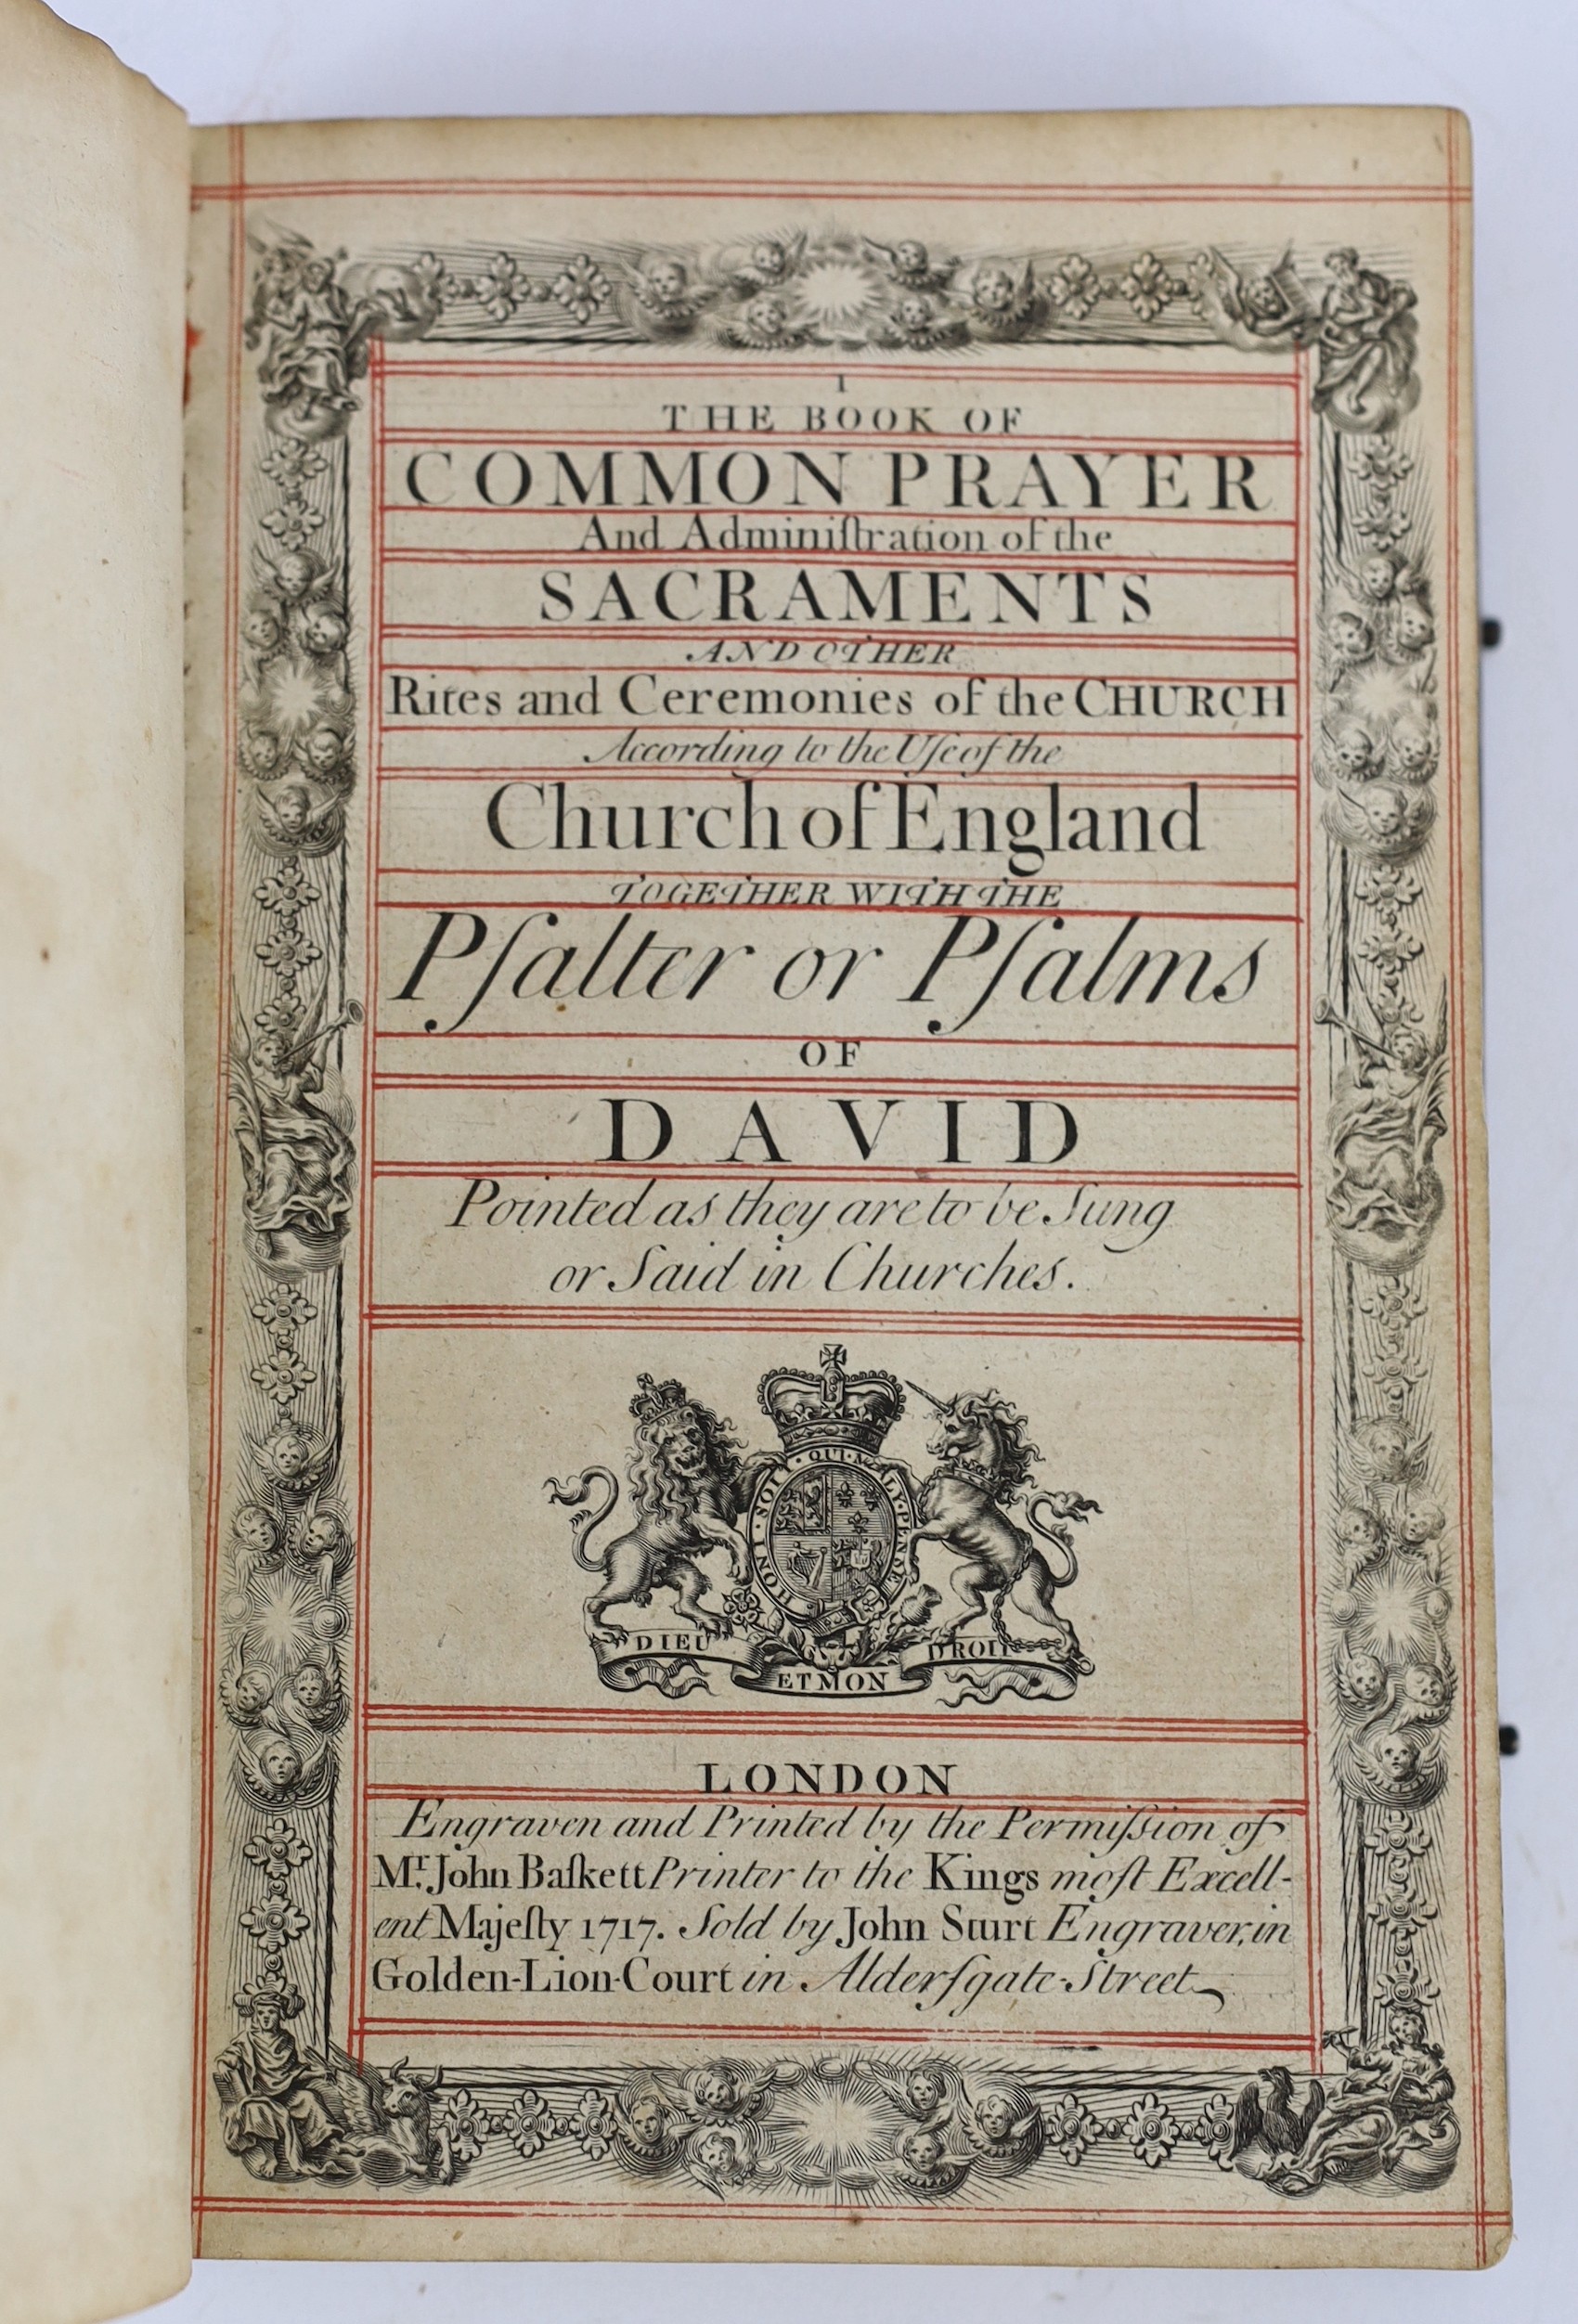 Sturt, John (1668-1730) - The Book of Common Prayer and Administration of the Sacraments, 21 pages of preliminaries including portraits of George I and a double portrait of the Prince and Princess of Wales, list of subsc